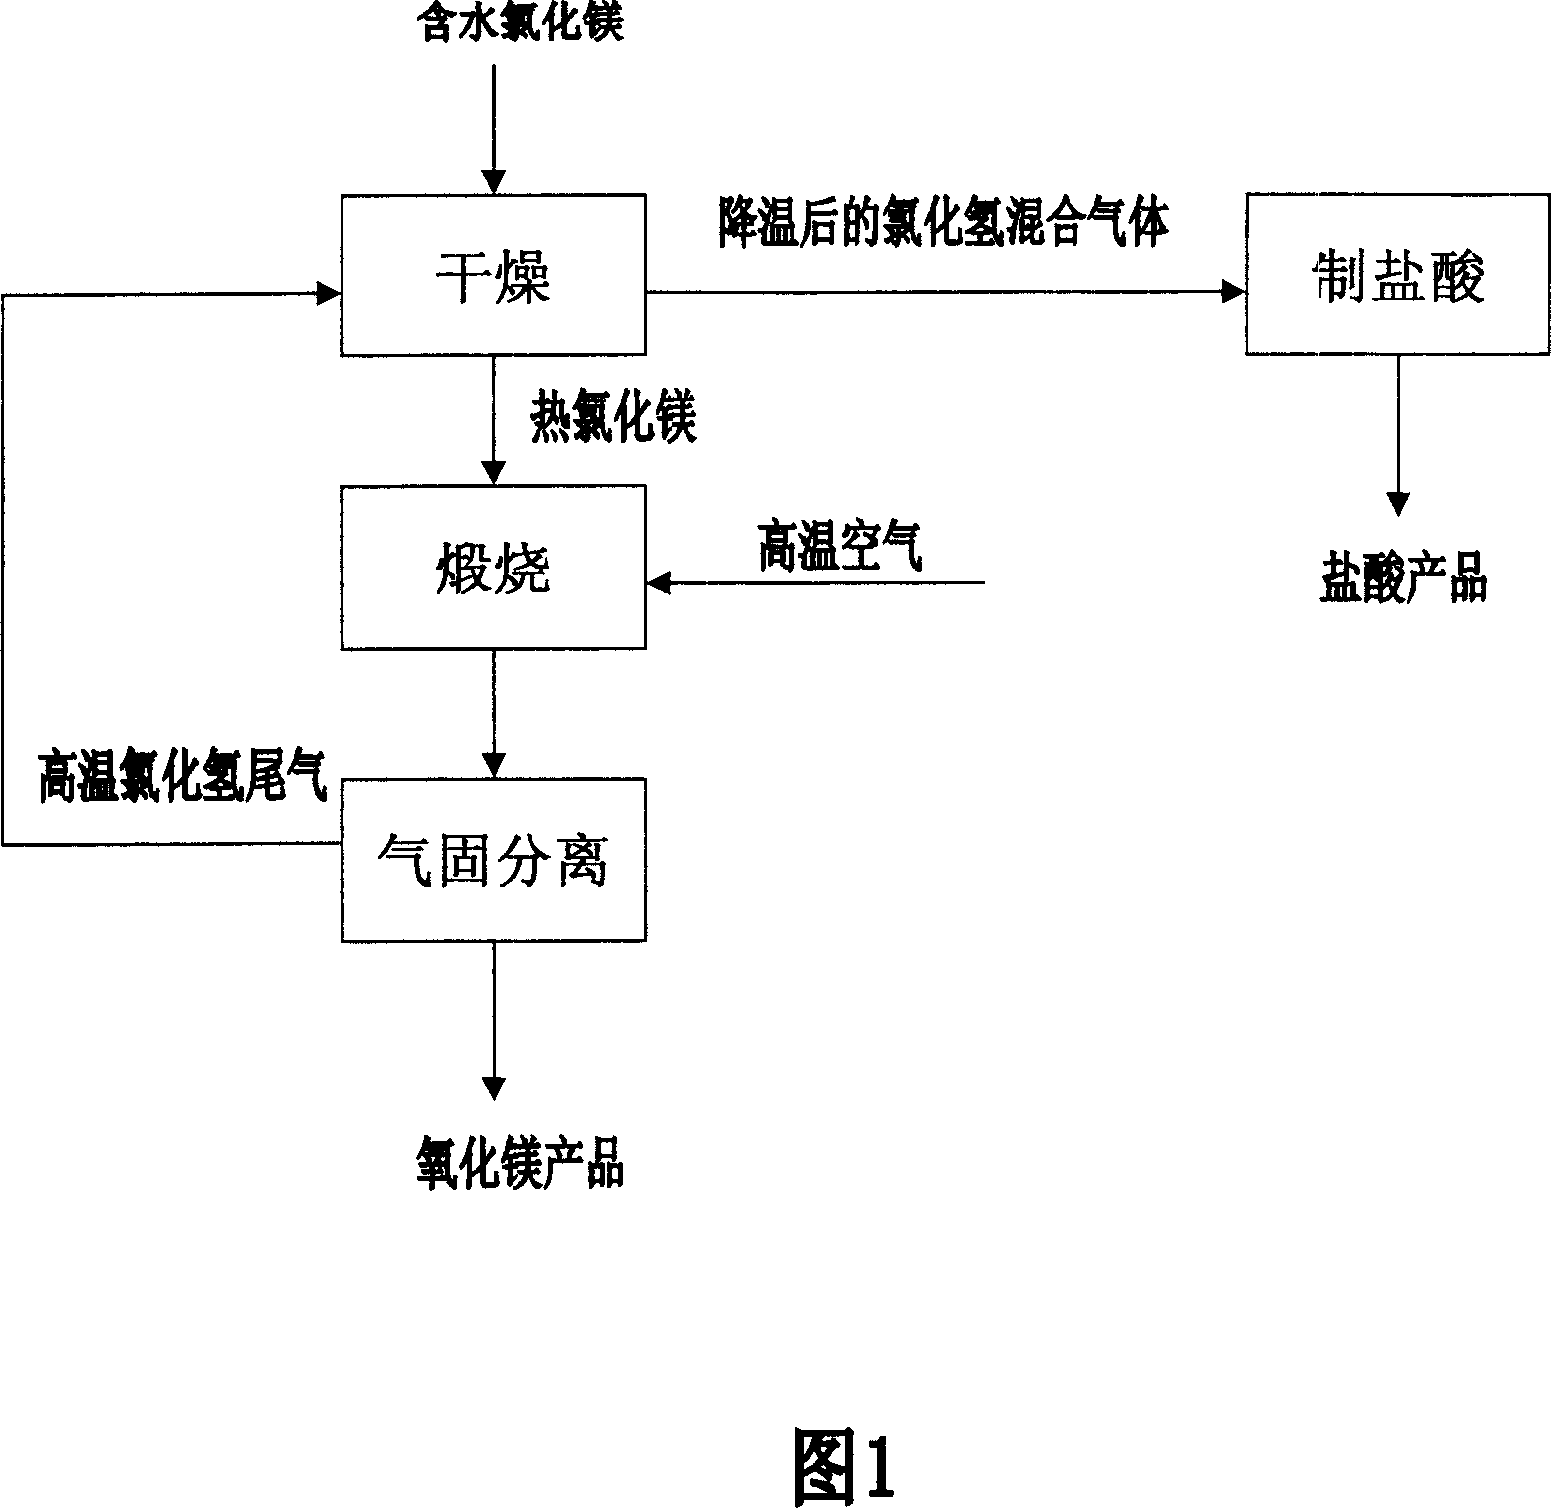 Process and apparatus for preparing magnesium oxide and hydrogen chloride mixed gas by two-stage dynamic calcining of magnesium chloride